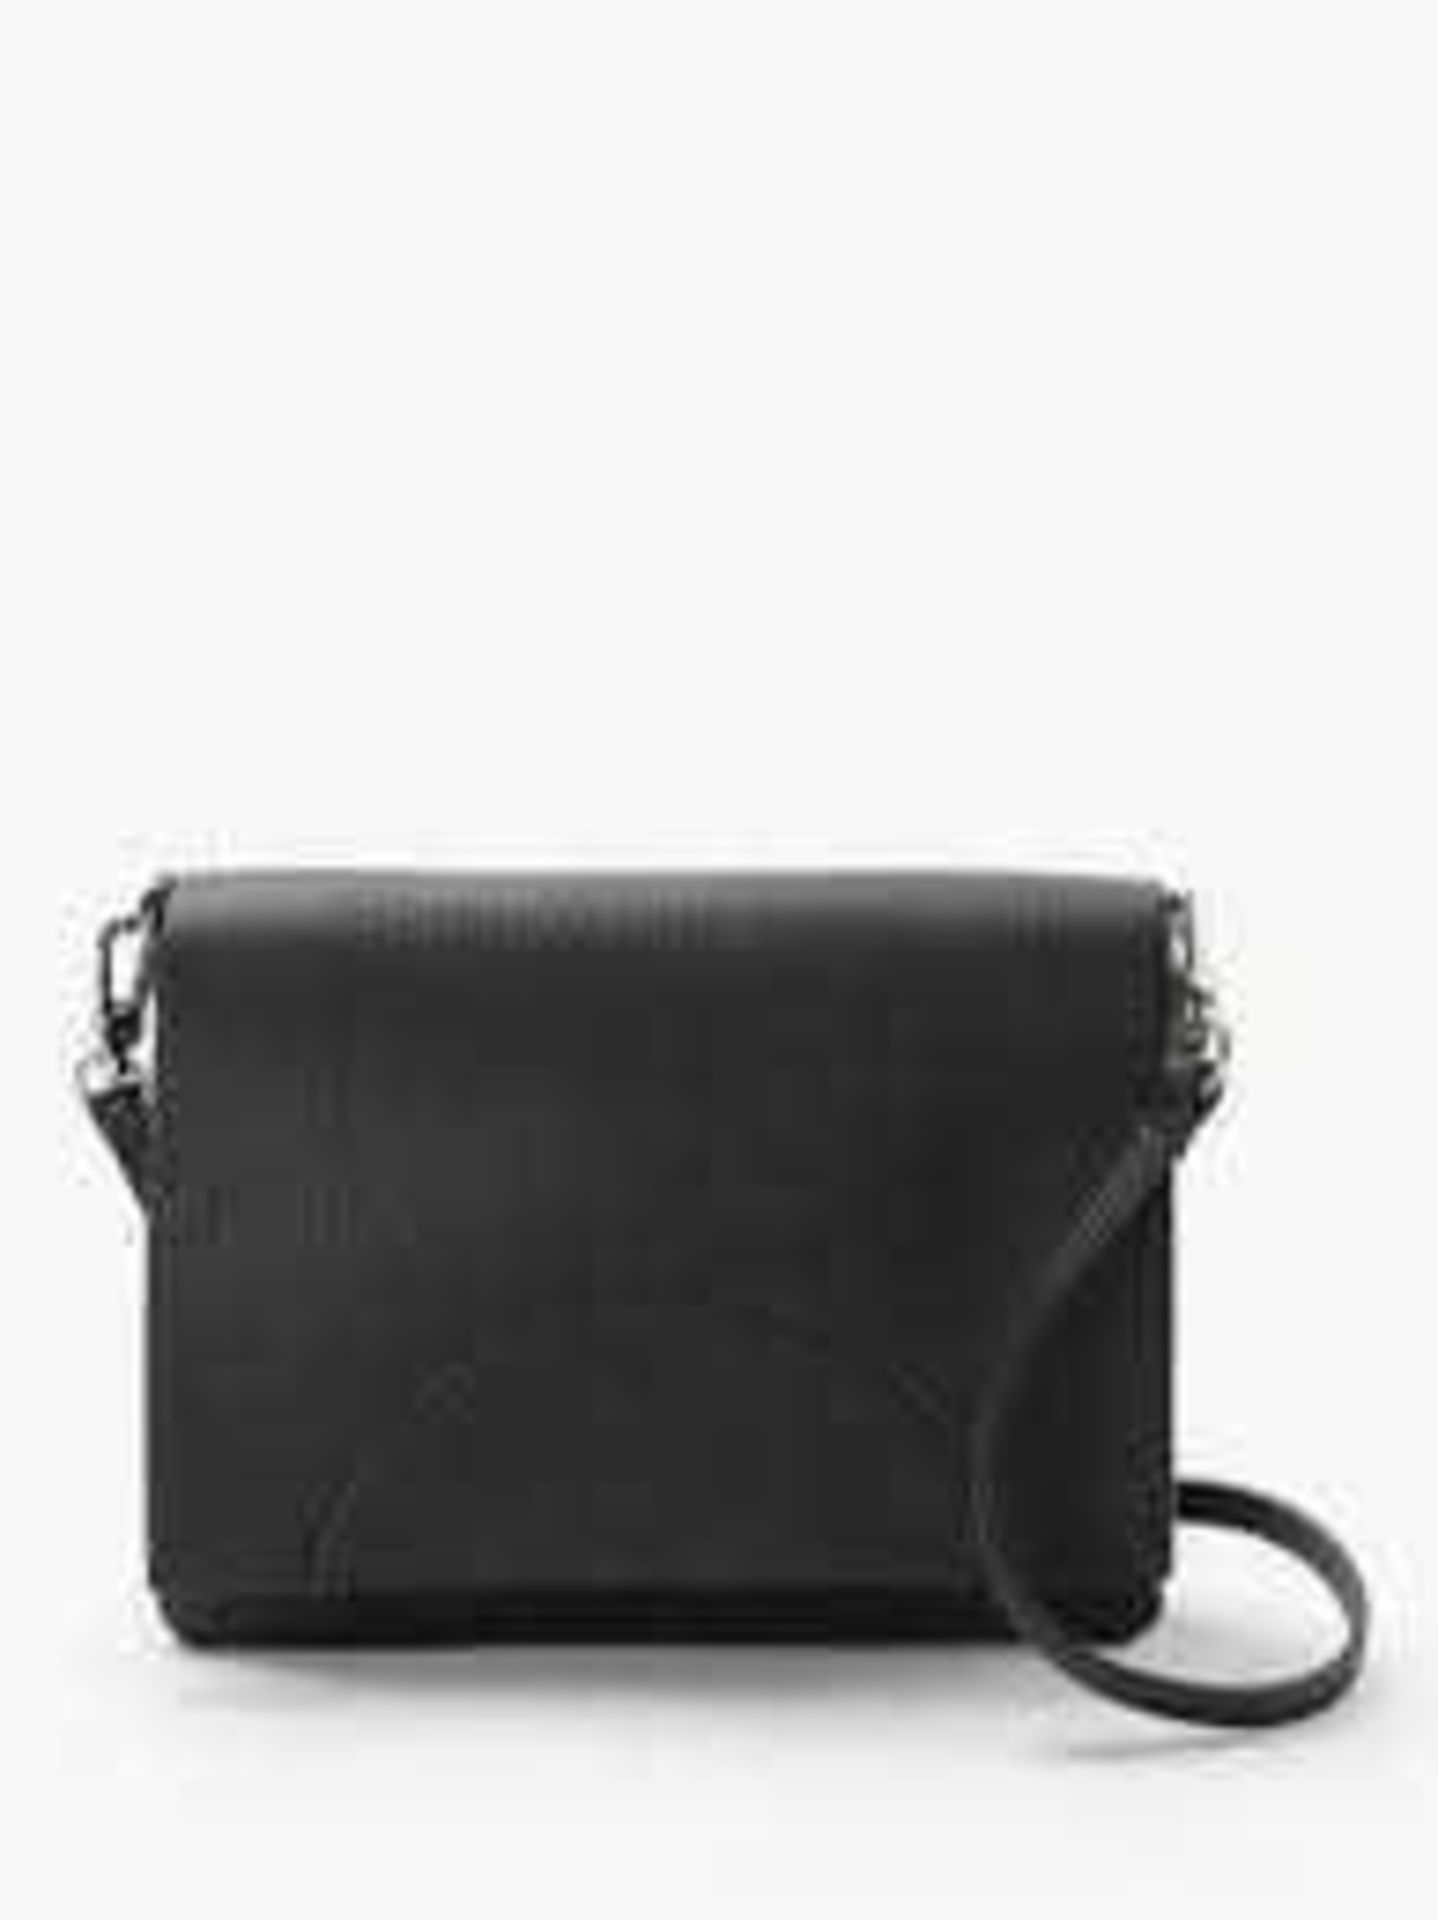 RRP £110 John Lewis And Partners Kiera Cross Body Bag In Black Leather 2.143 (Appraisals Available